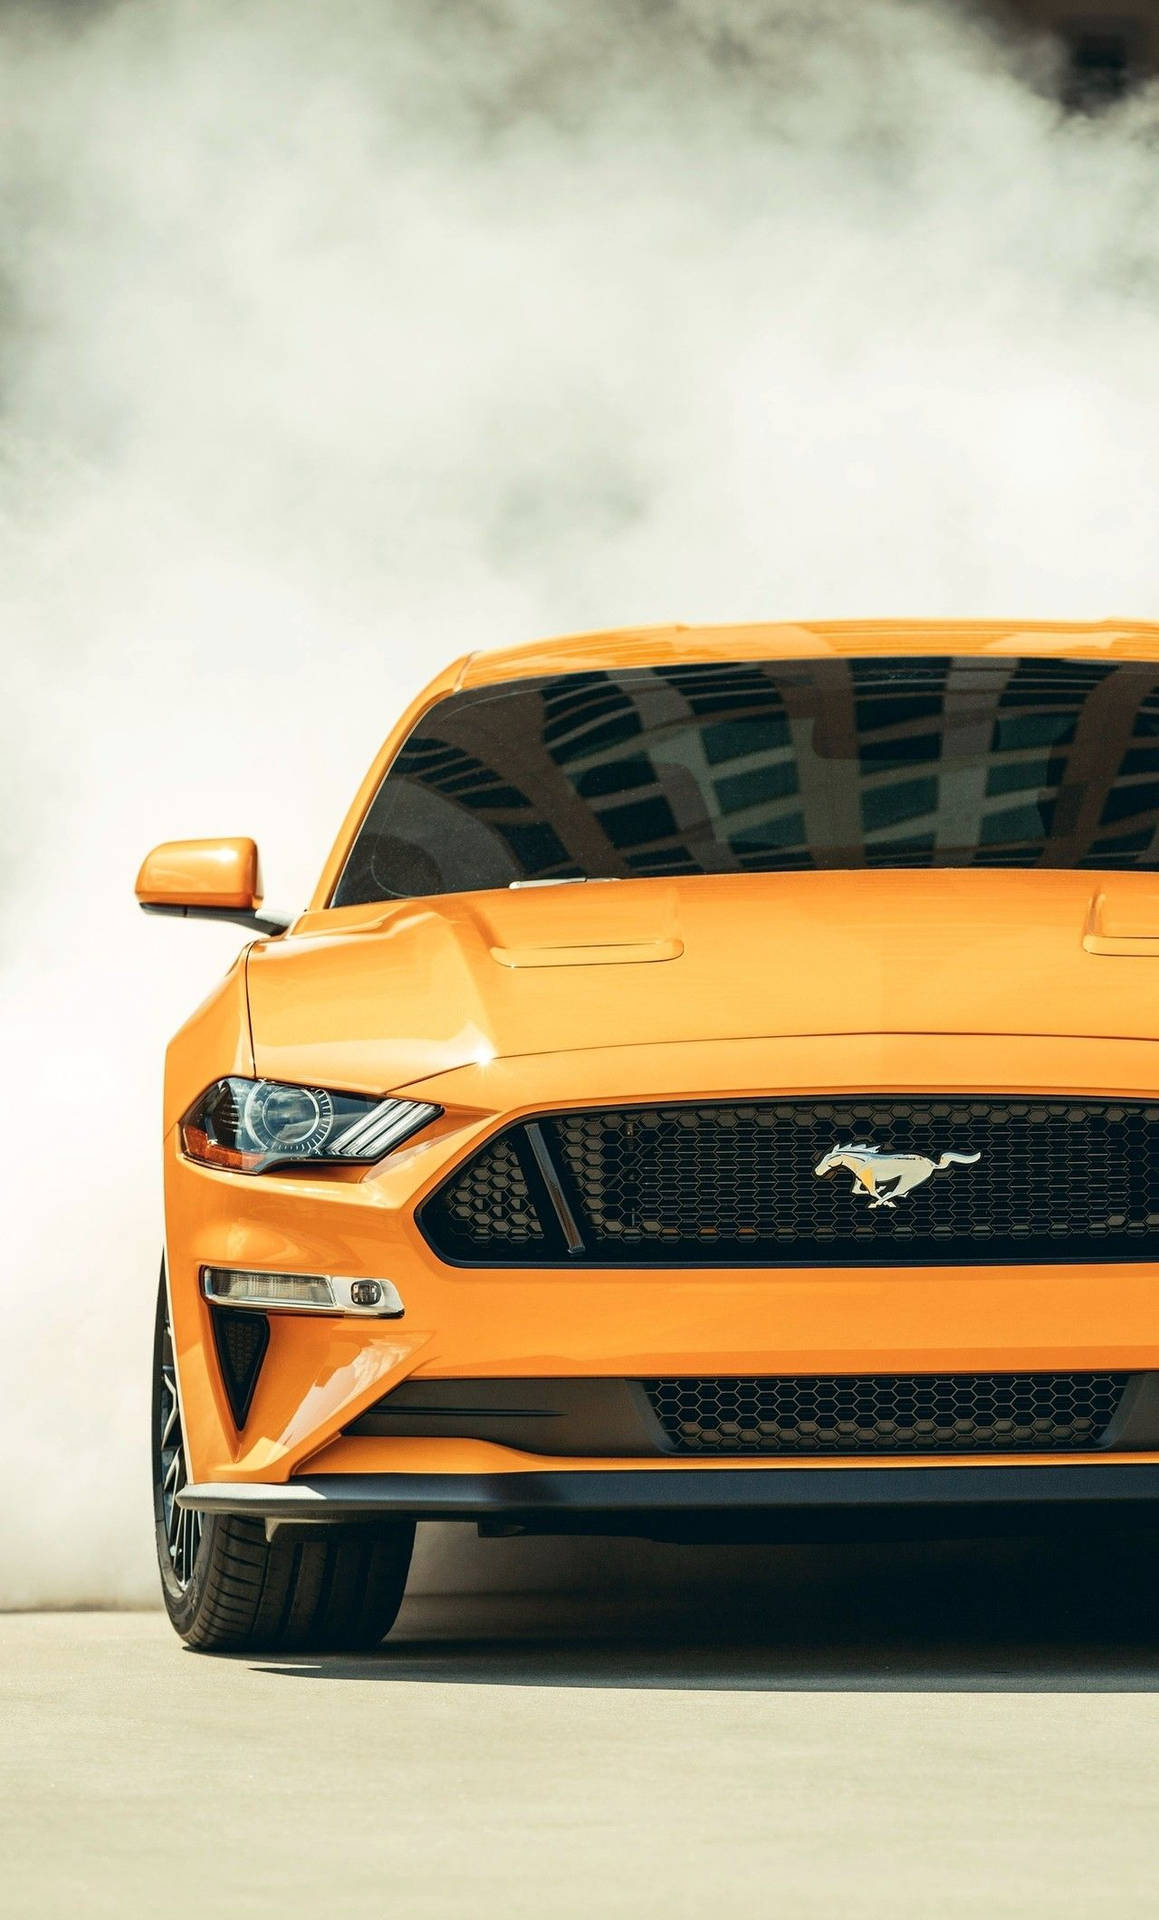 Ford Iphone Yellow Car Wallpaper